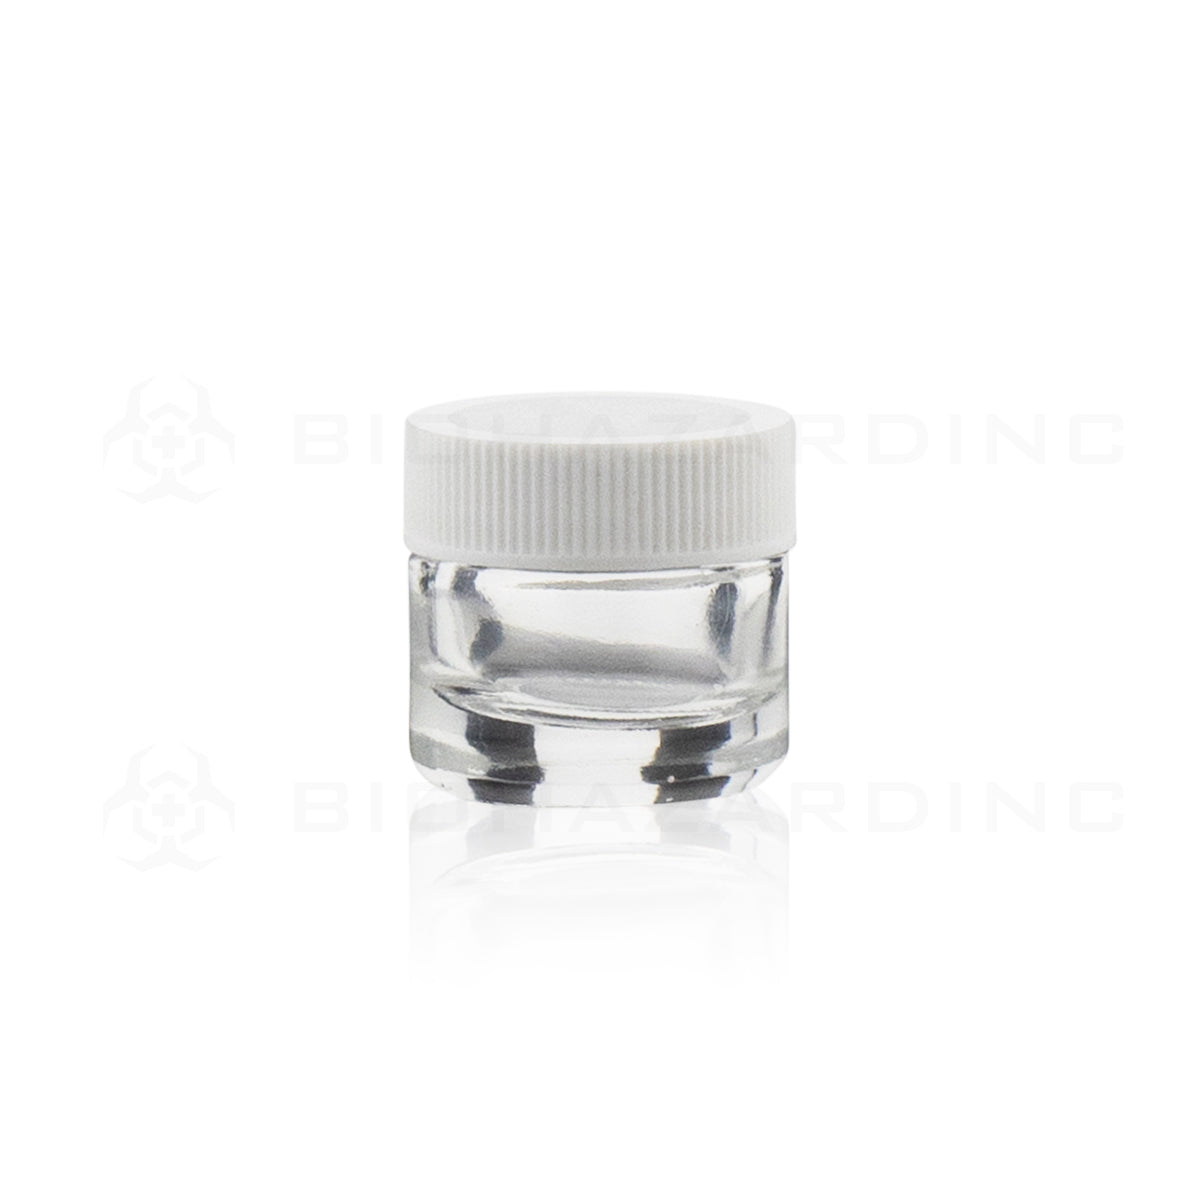 Concentrate Containers | Clear Glass Concentrate Containers w/ White Caps | 5ml - 250 Count Concentrate Container Biohazard Inc   